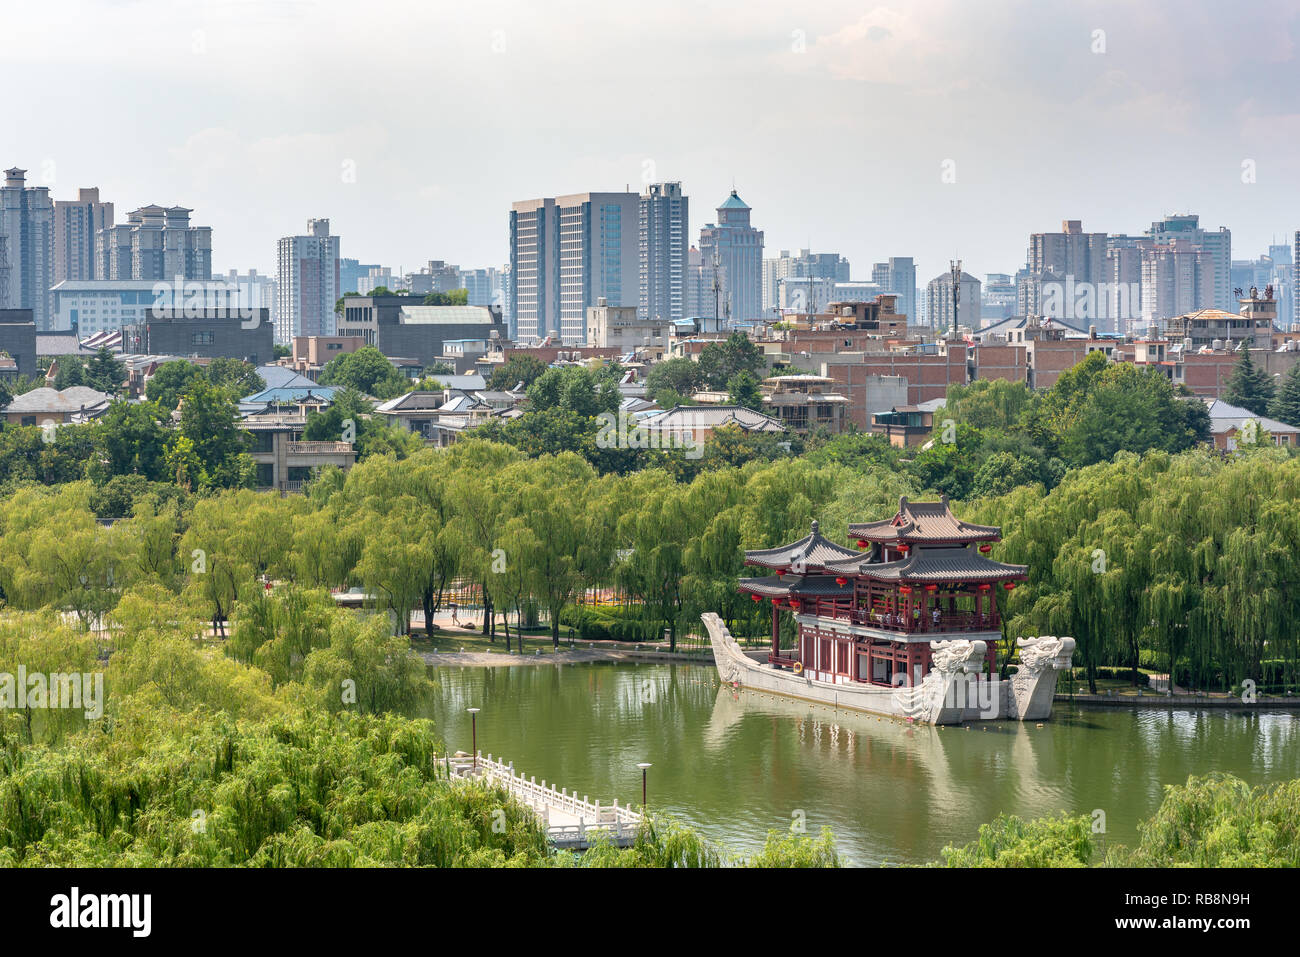 Xi'an, Shaanxi province, China - Aug 12, 2018 : Pagoda on a stone boat with dragon sculptures aerial view in Tang paradise park. Stock Photo